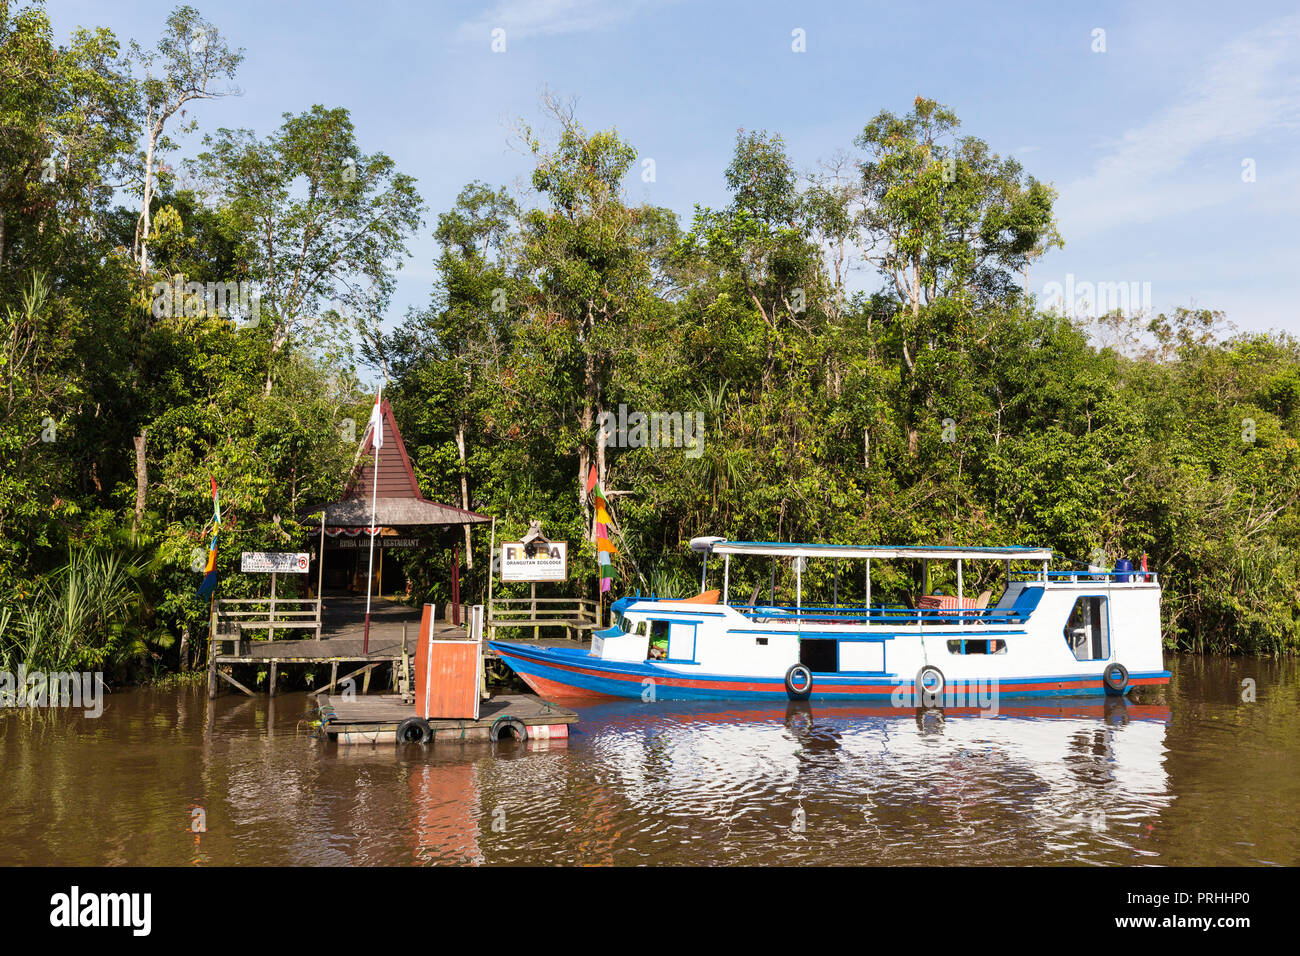 Klotok with tourists on the Sekonyer River, Tanjung Puting National Park, Borneo, Indonesia. Stock Photo